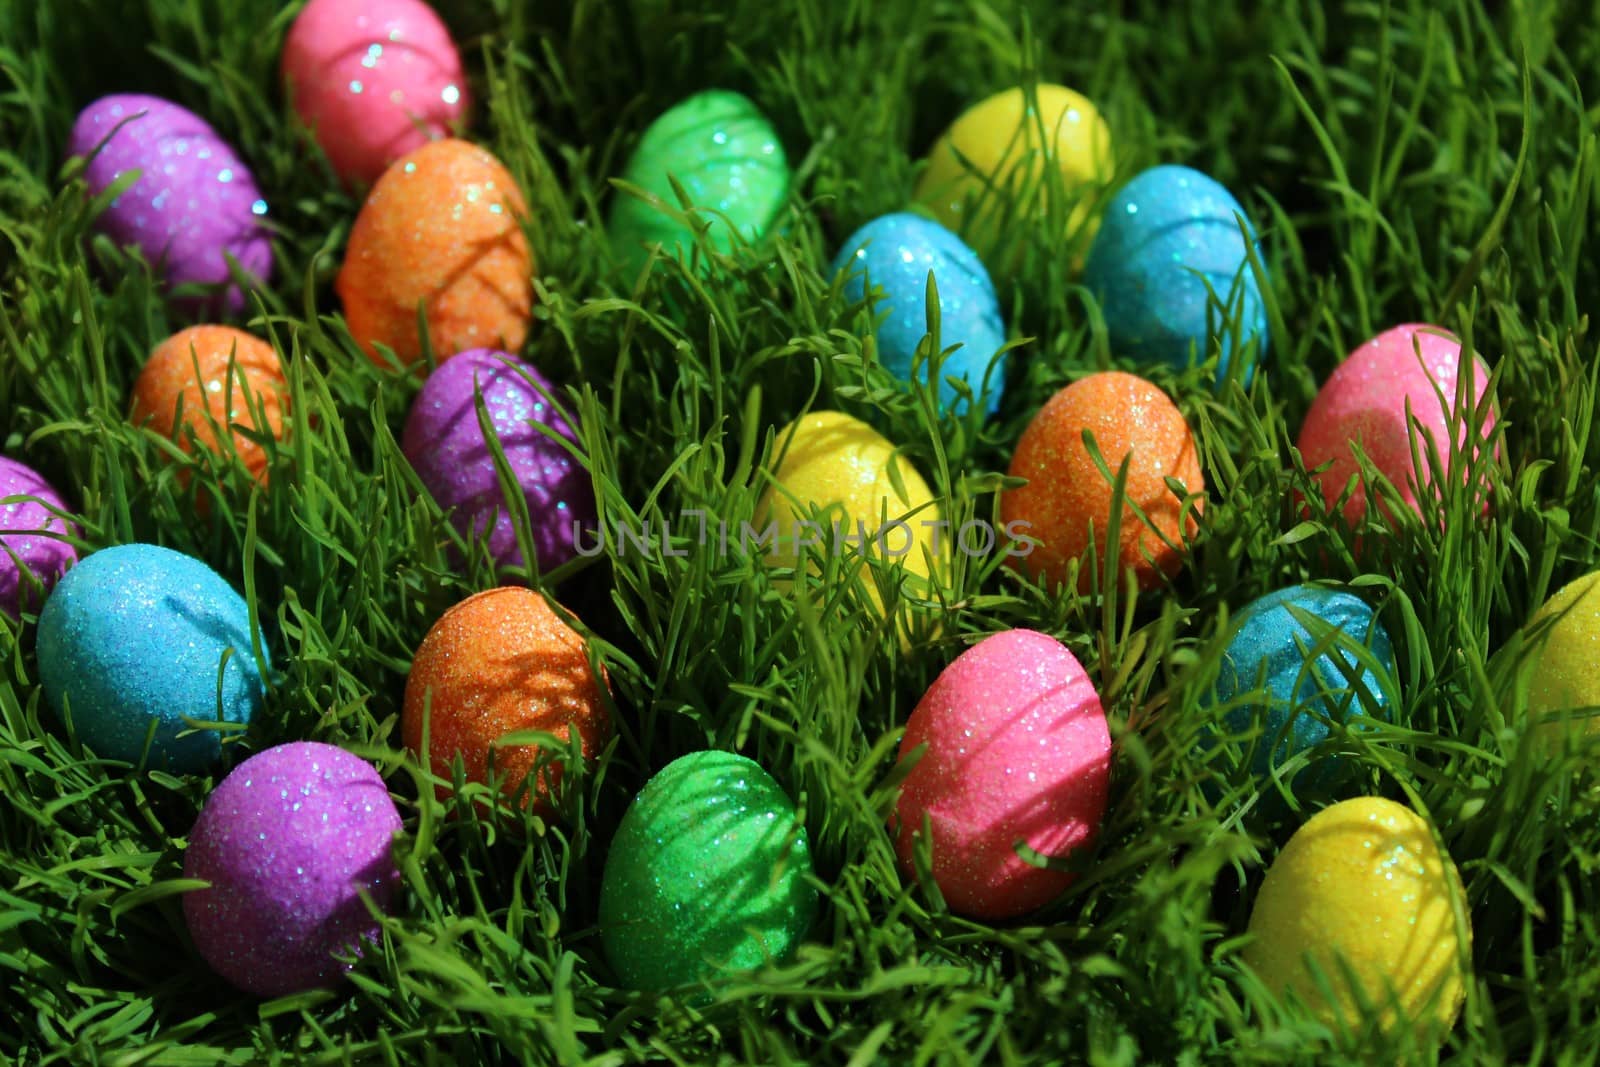 The picture shows colourful eastereggs in eastergrass